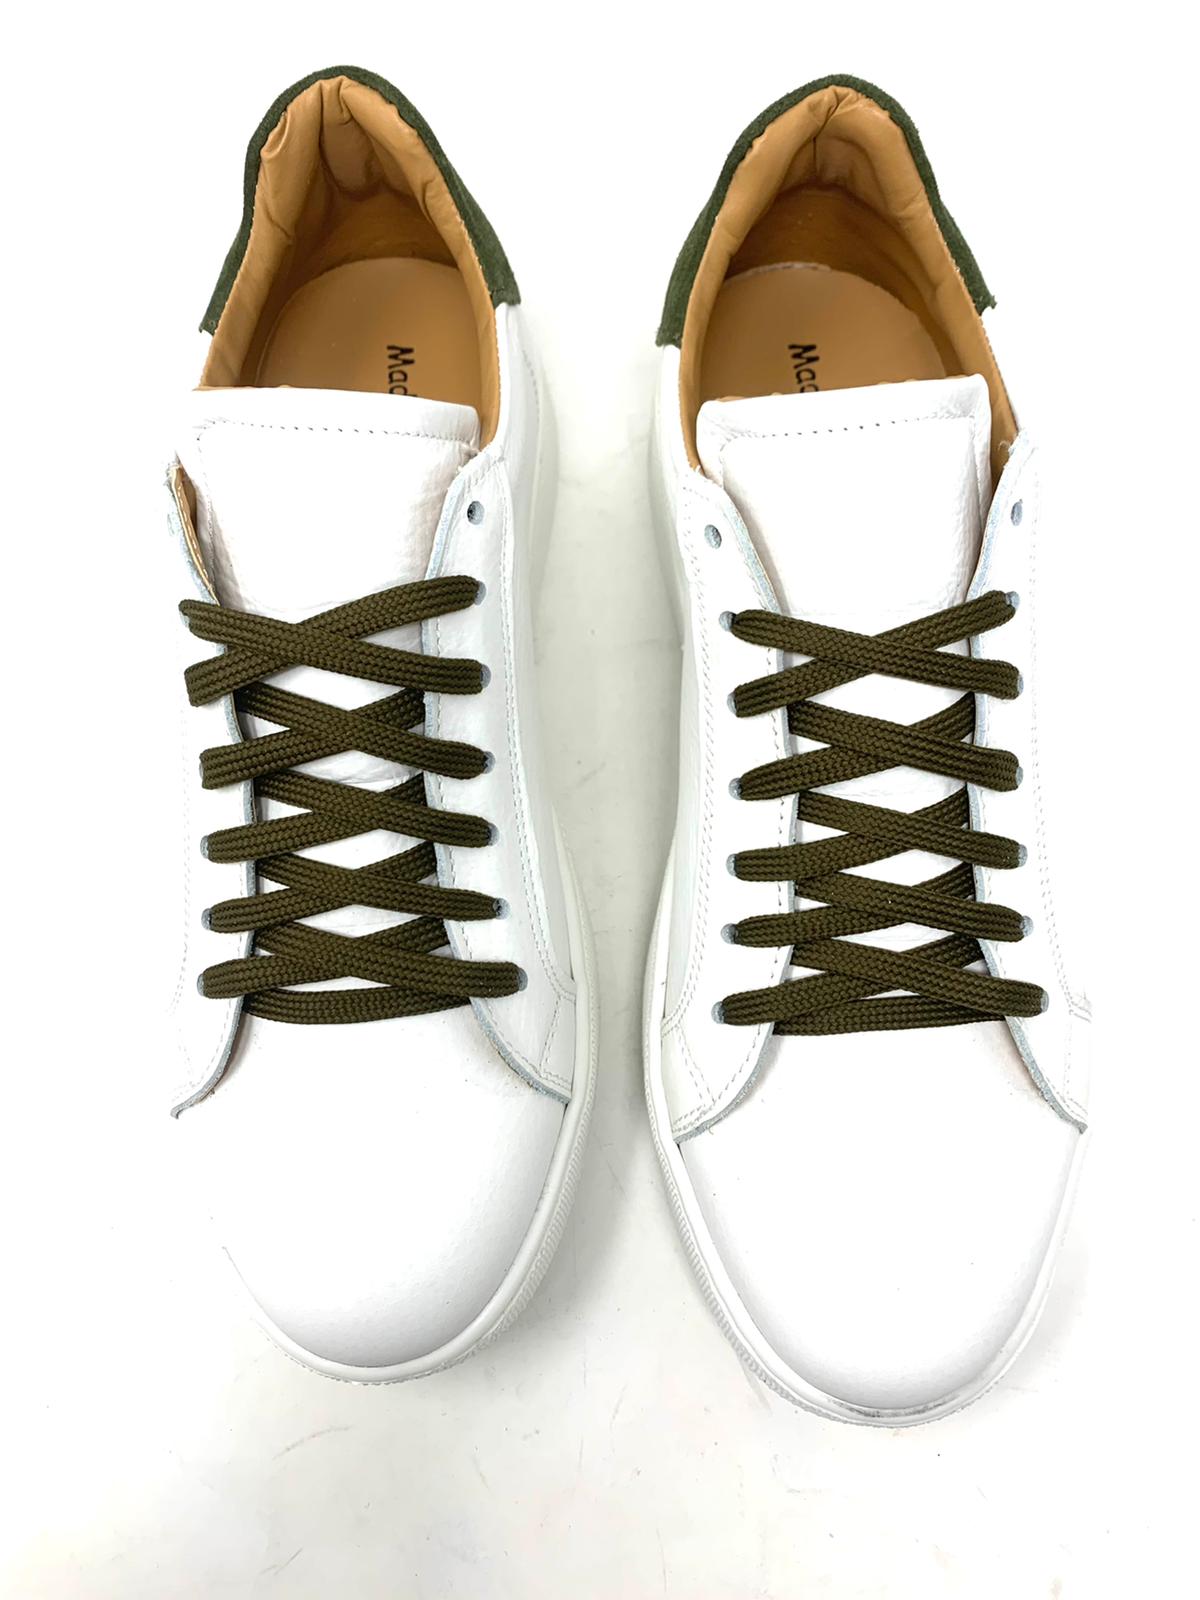 Genuine tumbled leather sneakers MADE IN ITALY